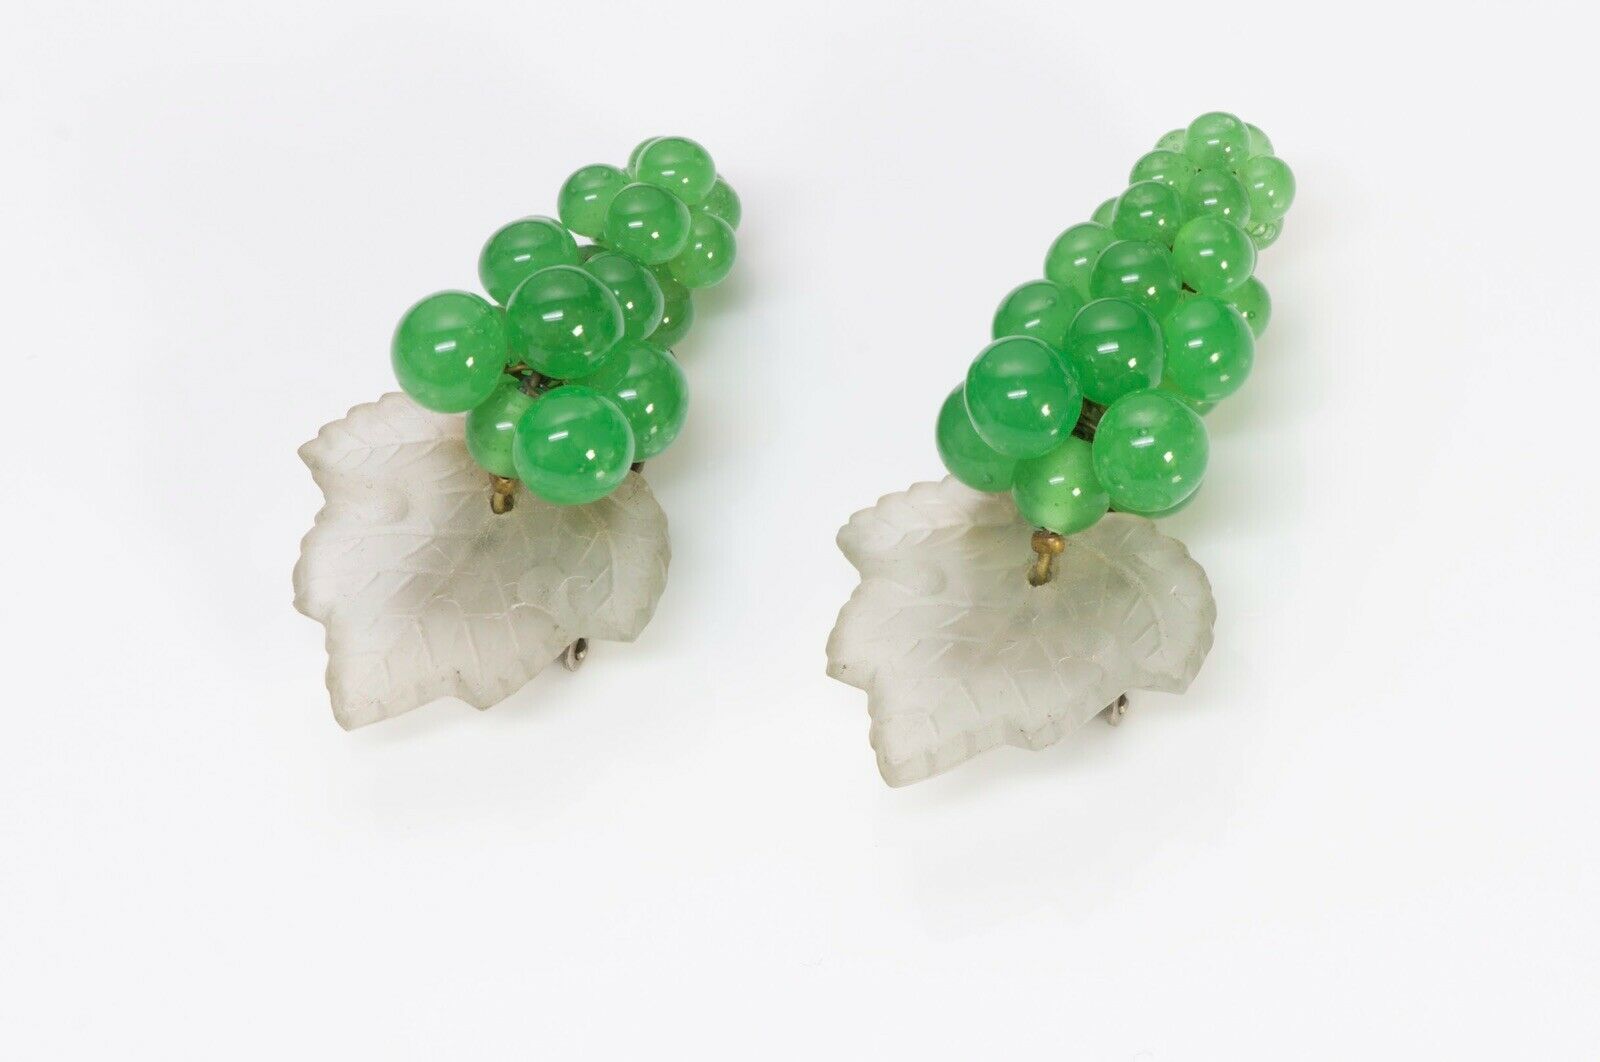 Louis Rousselet 1940’s Green Glass Beads Grape Leaf Double Clips Brooch